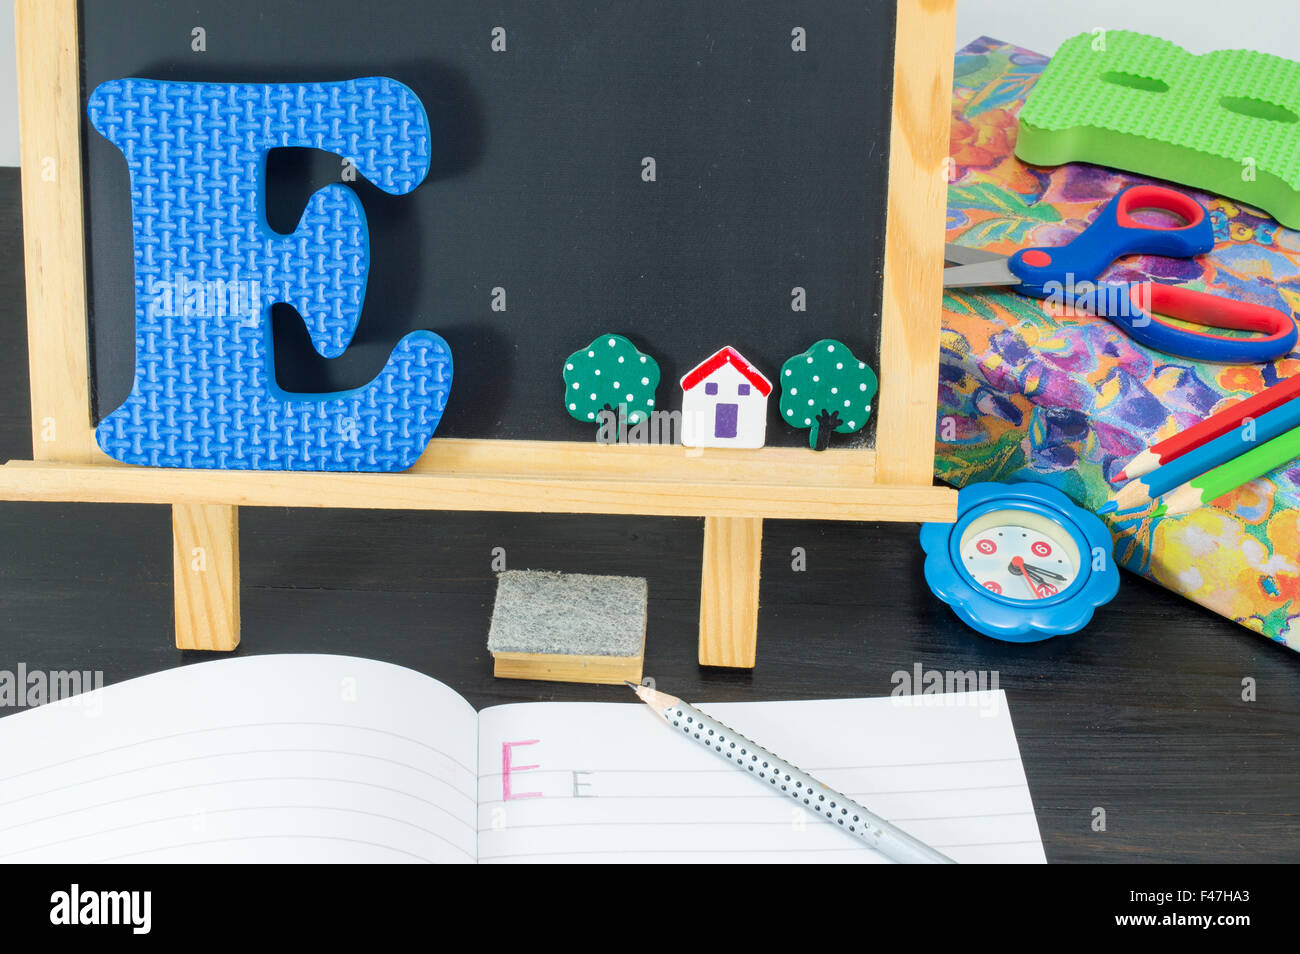 Learning the letter E. Blackboard, notebook, pencil and learning accessories Stock Photo